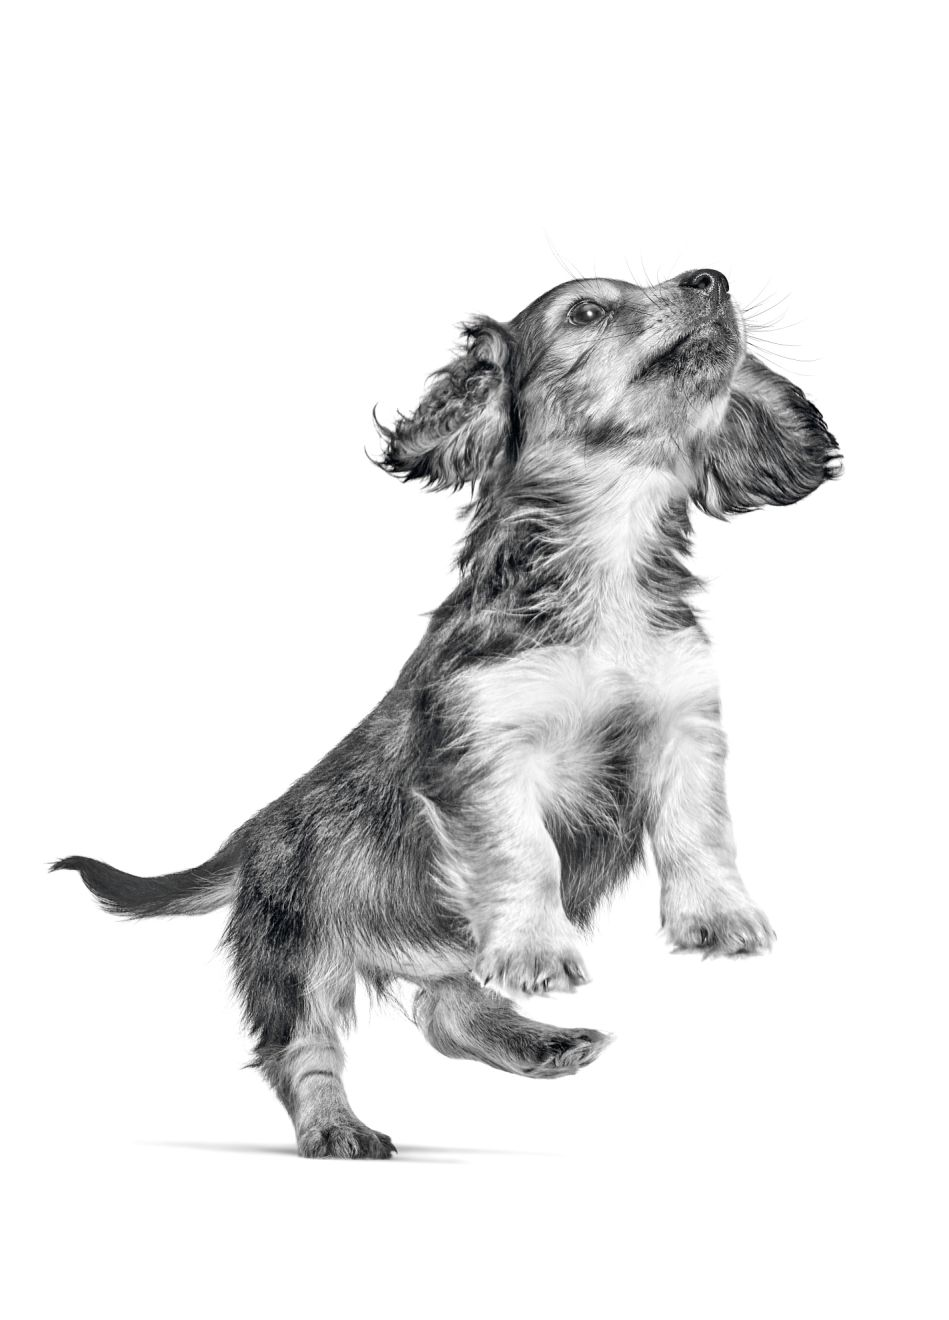 Dachshund puppy jumping in black and white on a white background